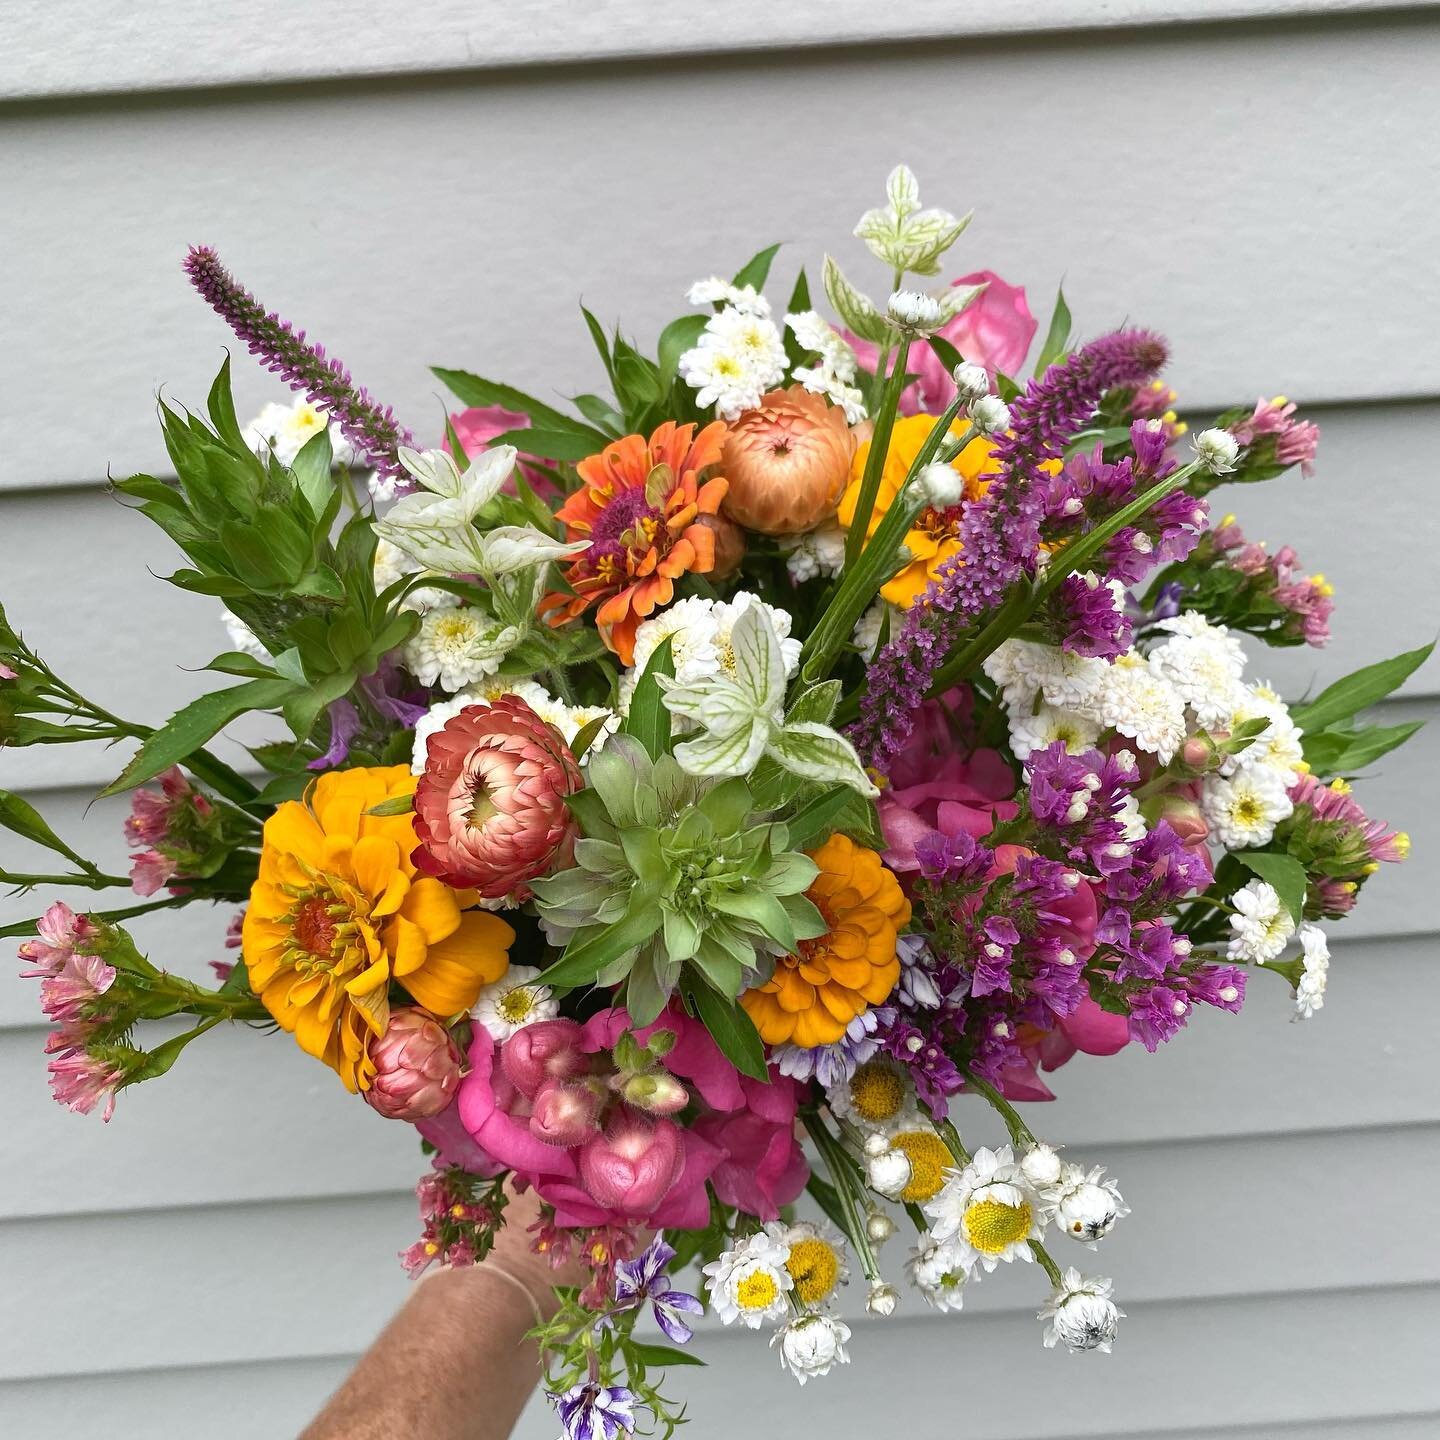 Mixed bouquets being put together this morning, Sunday July 11th, for The Flower Cart, first house on left Sleepy Hollow Road North Stonington, CT and for @denison_farmers_market 12-3 120 Pequotsepos Road Mystic, CT. #farmflowers 
.
.
#bouquet #bouqu